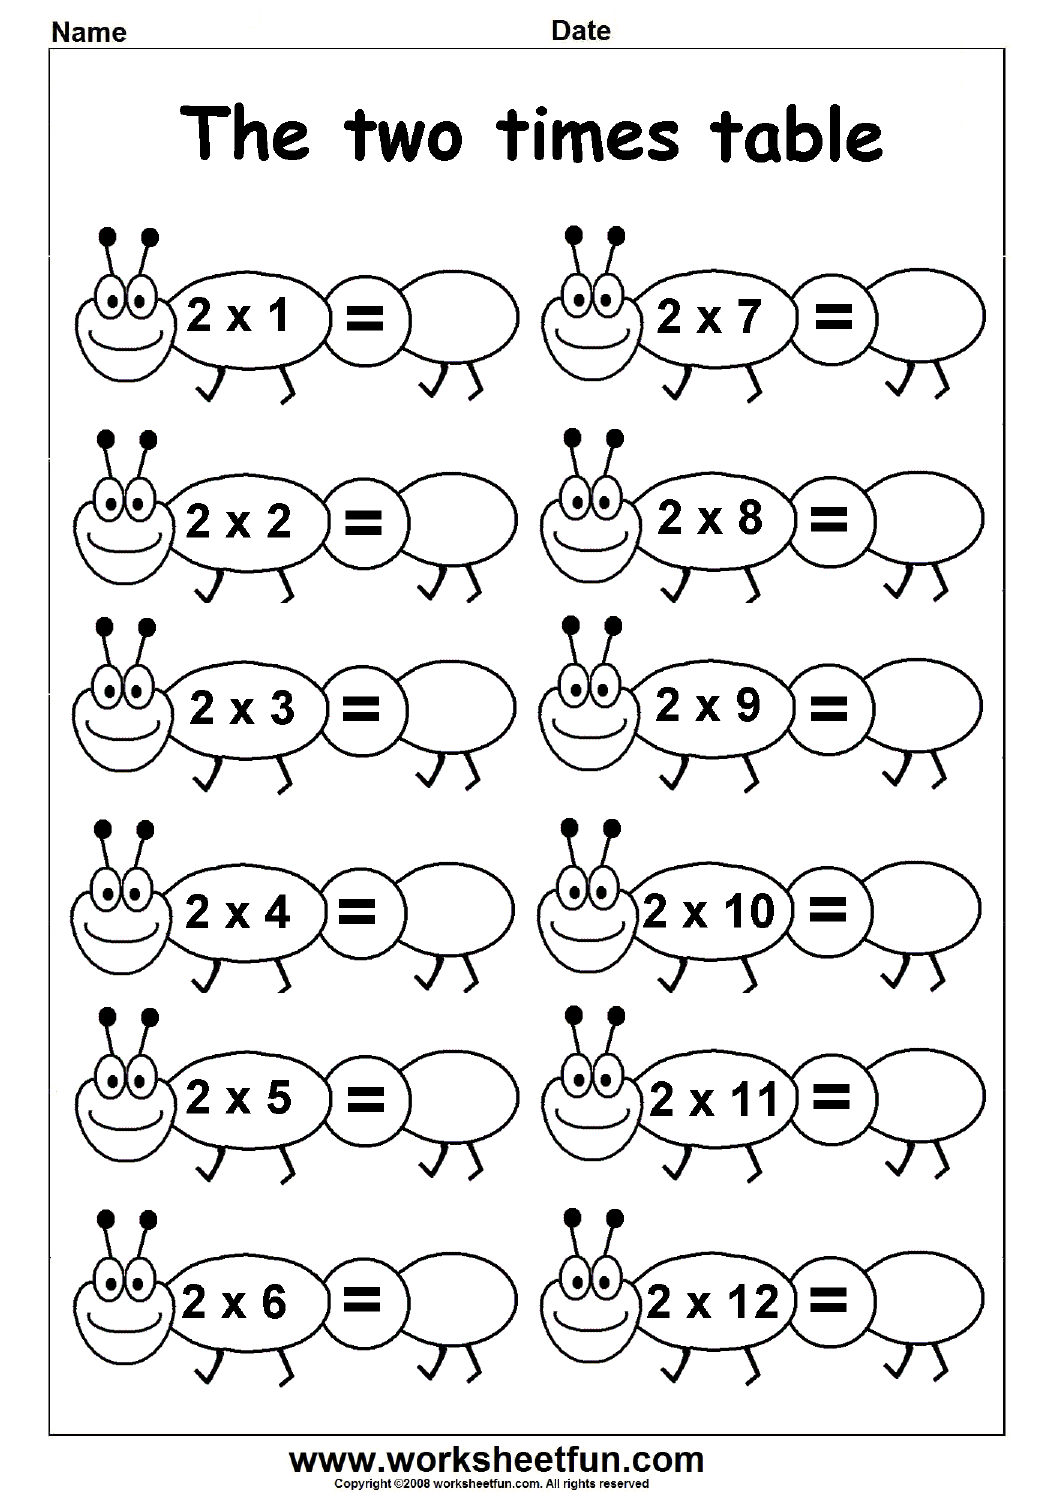 Multiplication Times Tables Worksheets – 22, 22, 22, 22, 22 & 22 Times For 2 Times Table Worksheet